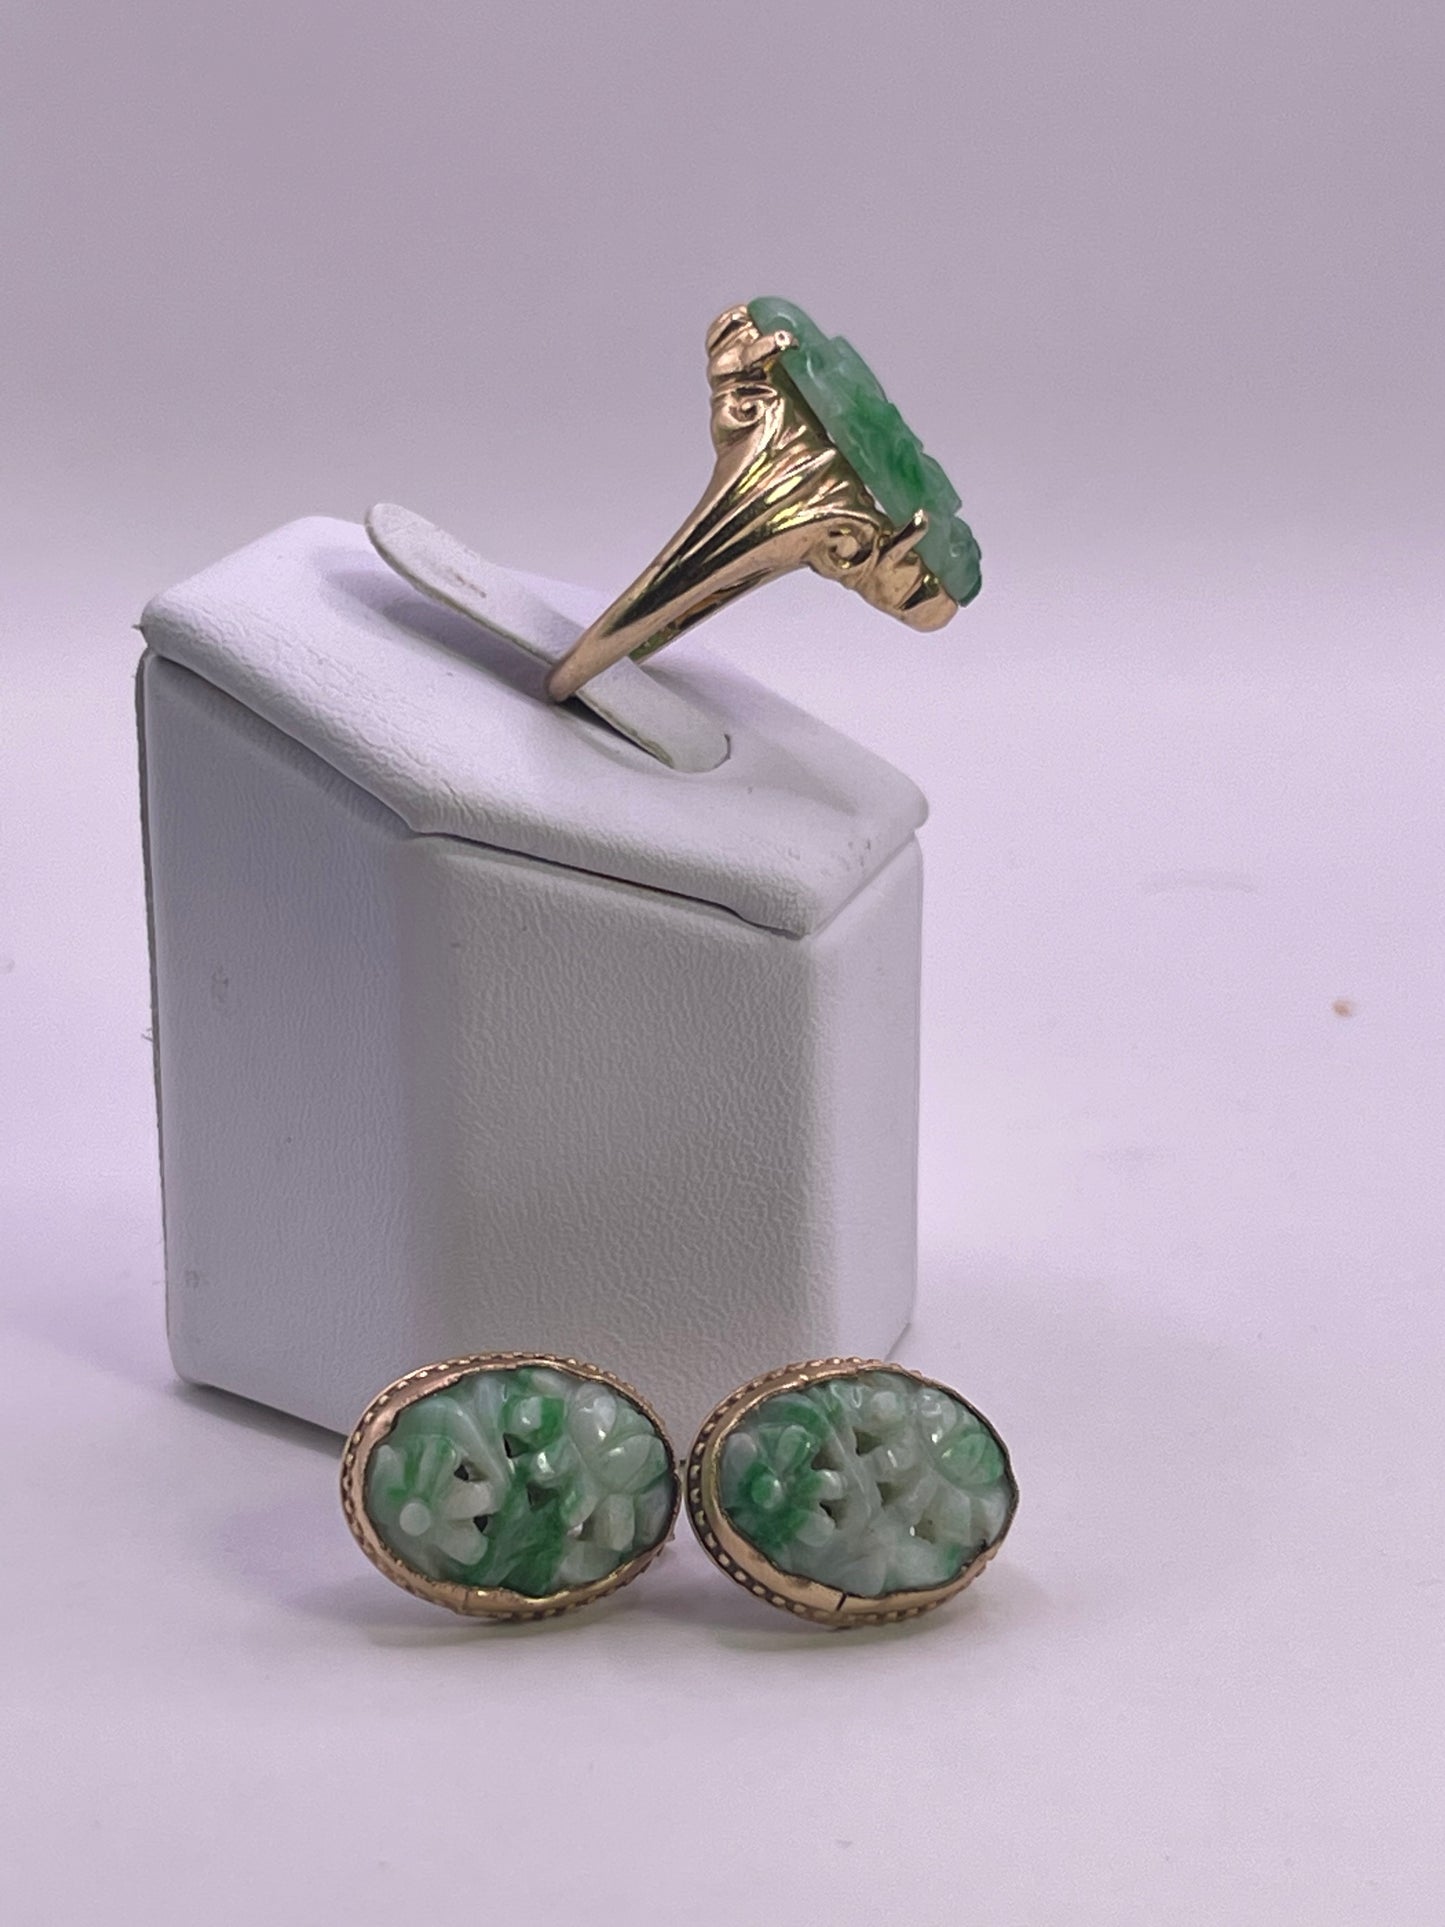 A jade jewelry set is 14kt gold setting